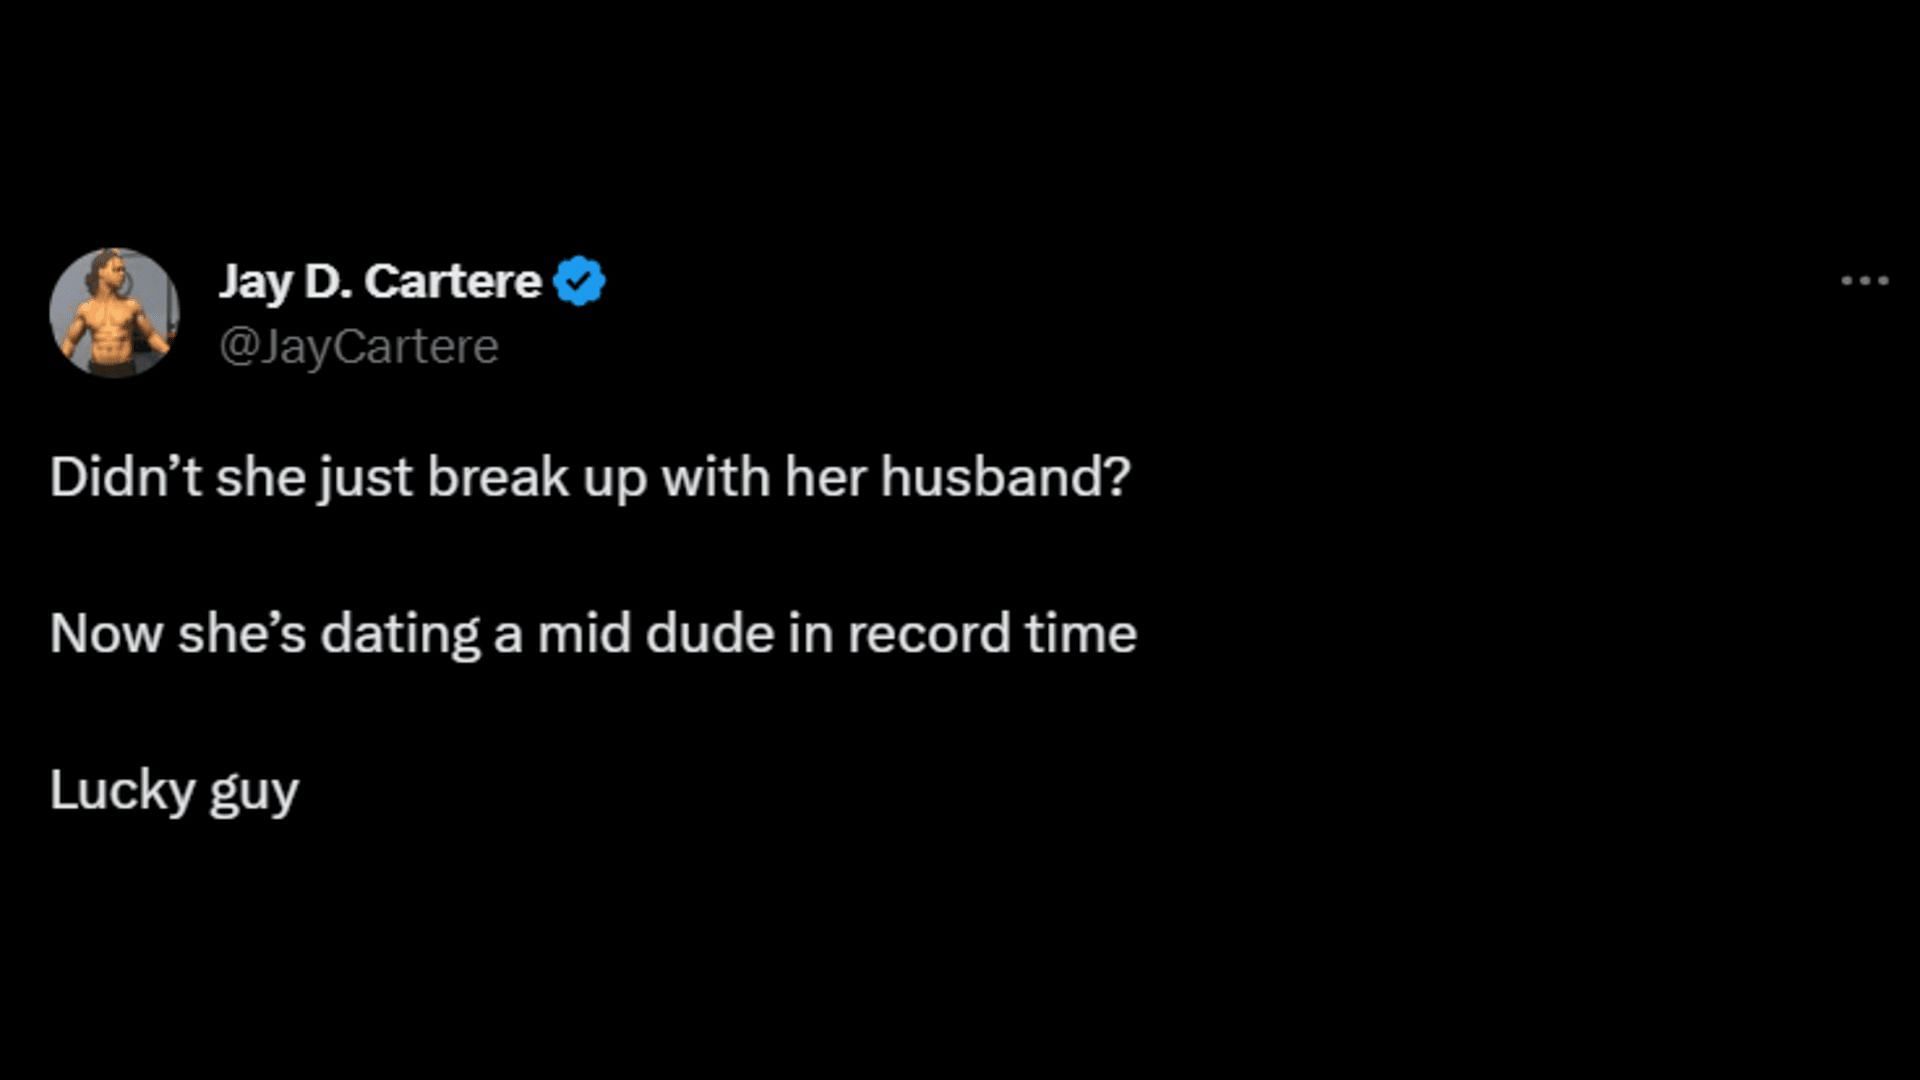 A netizen directly slammed Grande for dating so soon after her separation from her husband. (Image via Twitter/Jay D. Cartere)